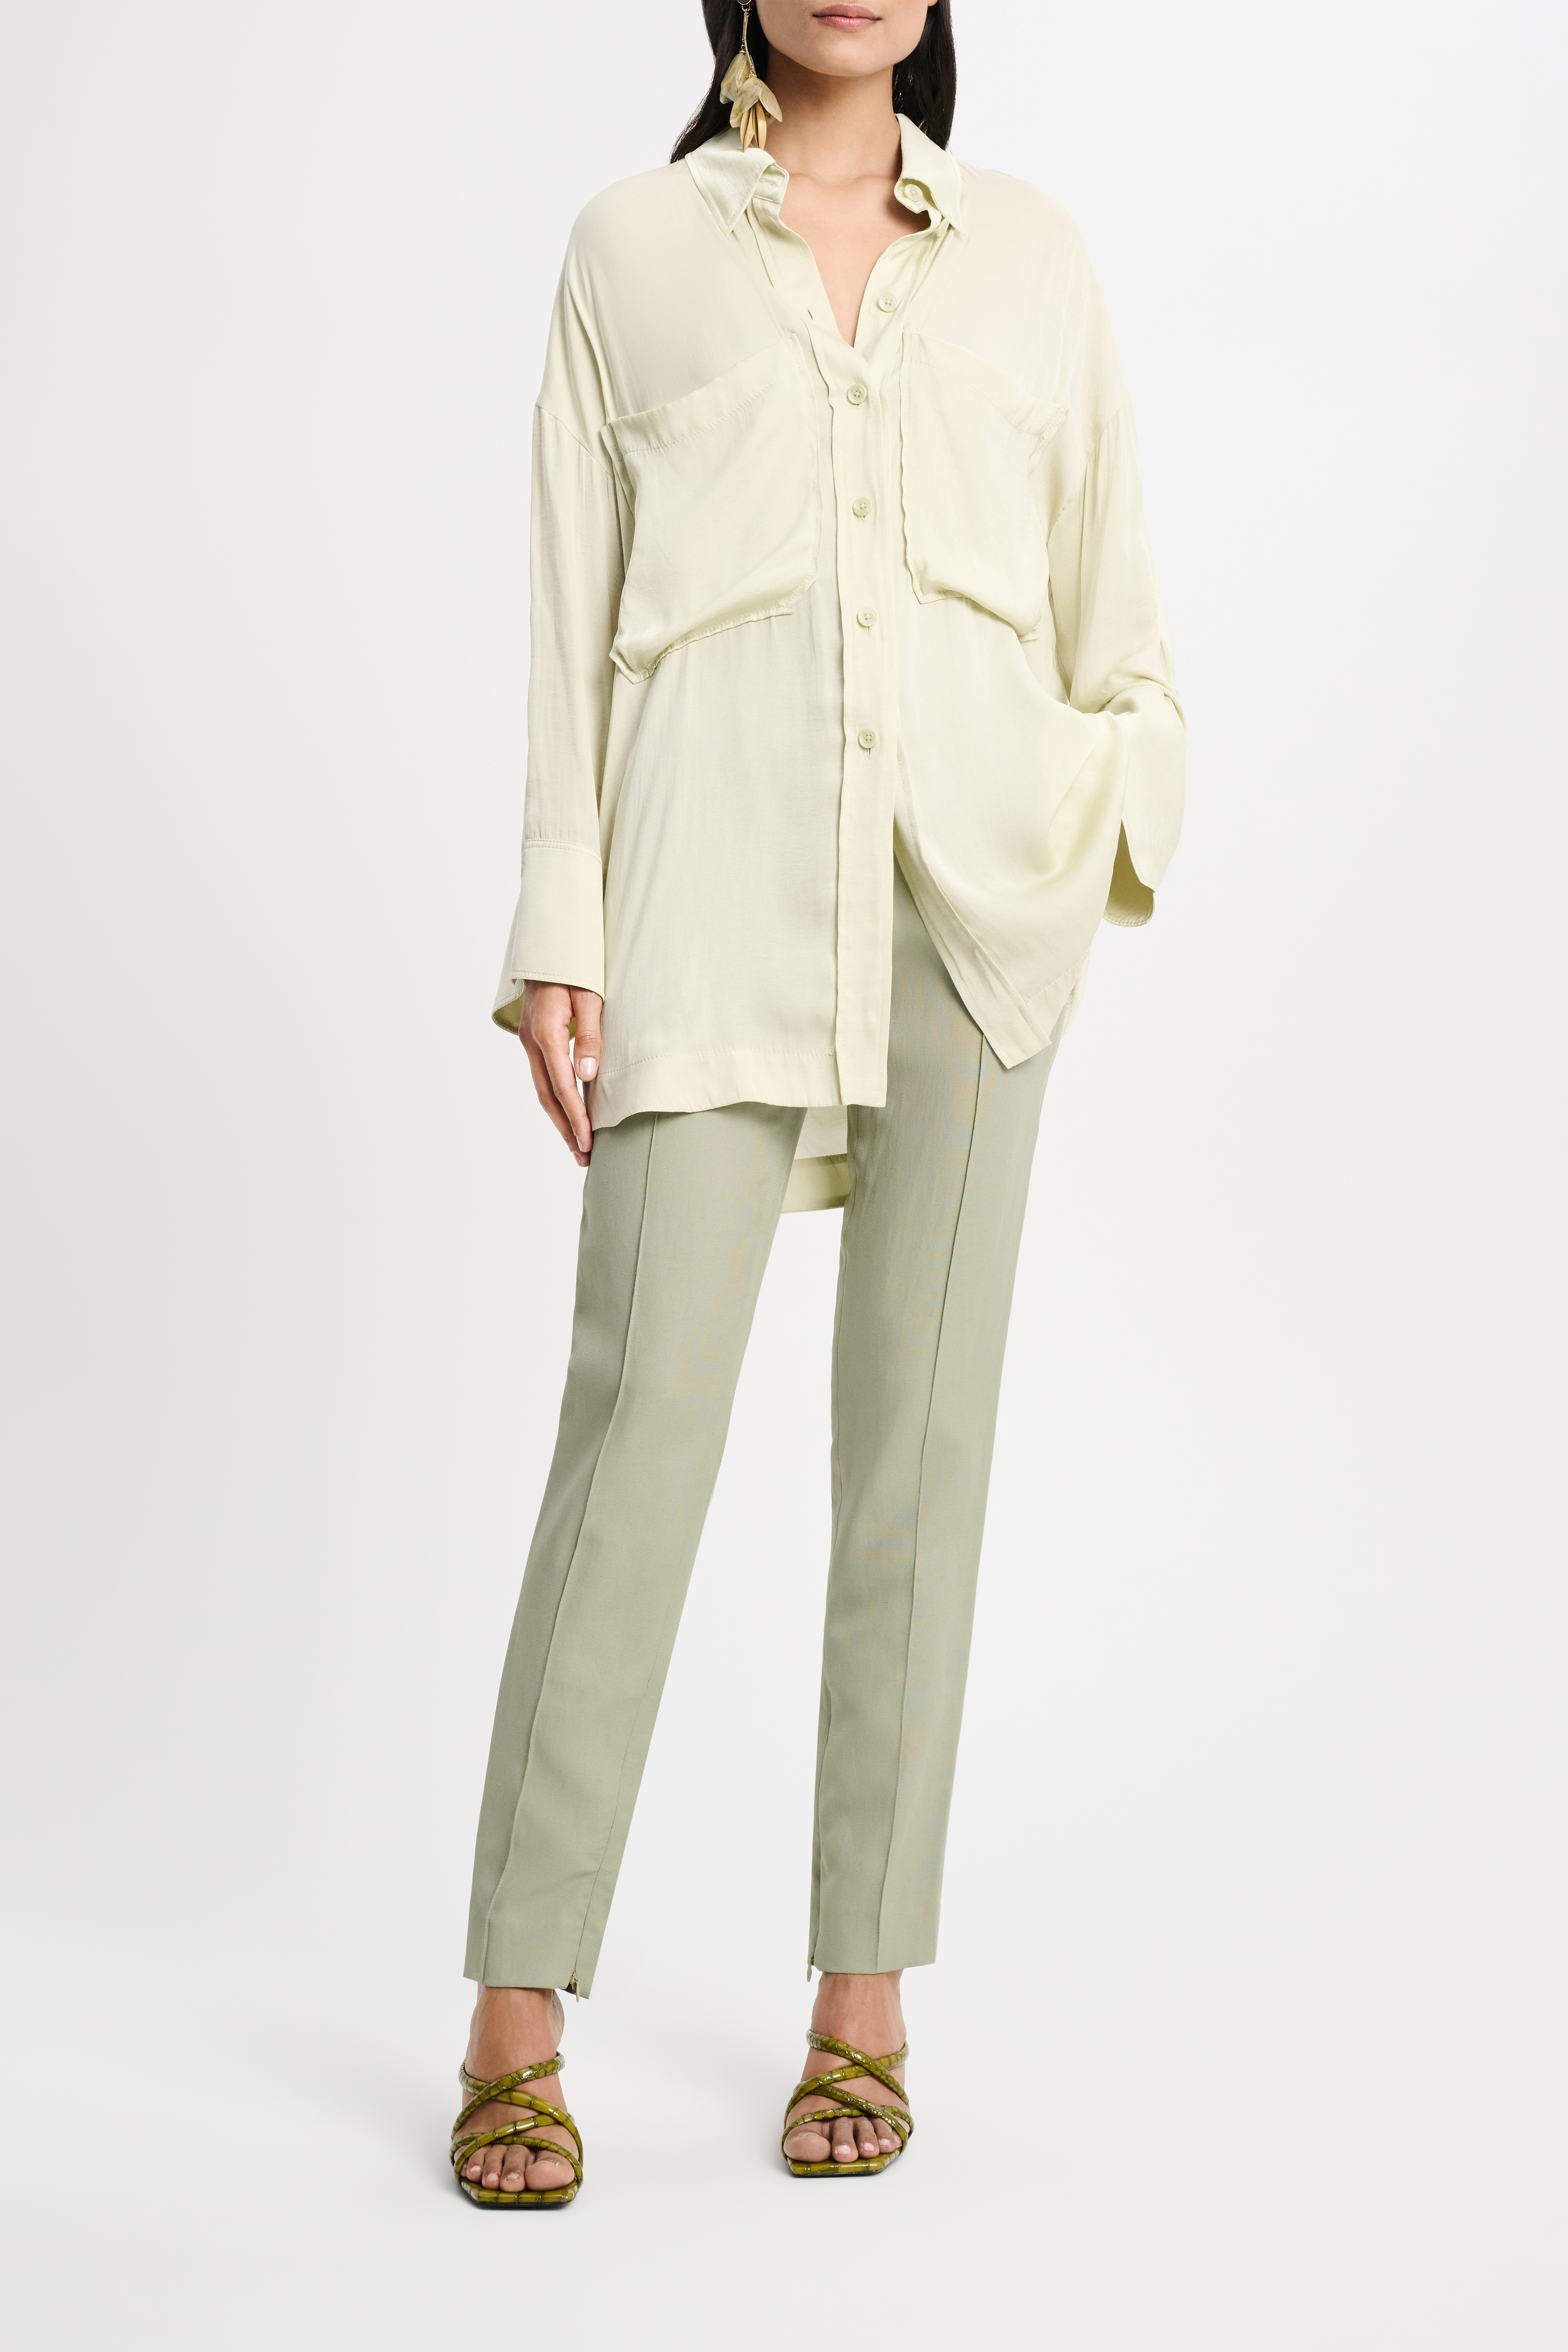 Dorothee Schumacher Oversized shirt in crinkle satin with patch